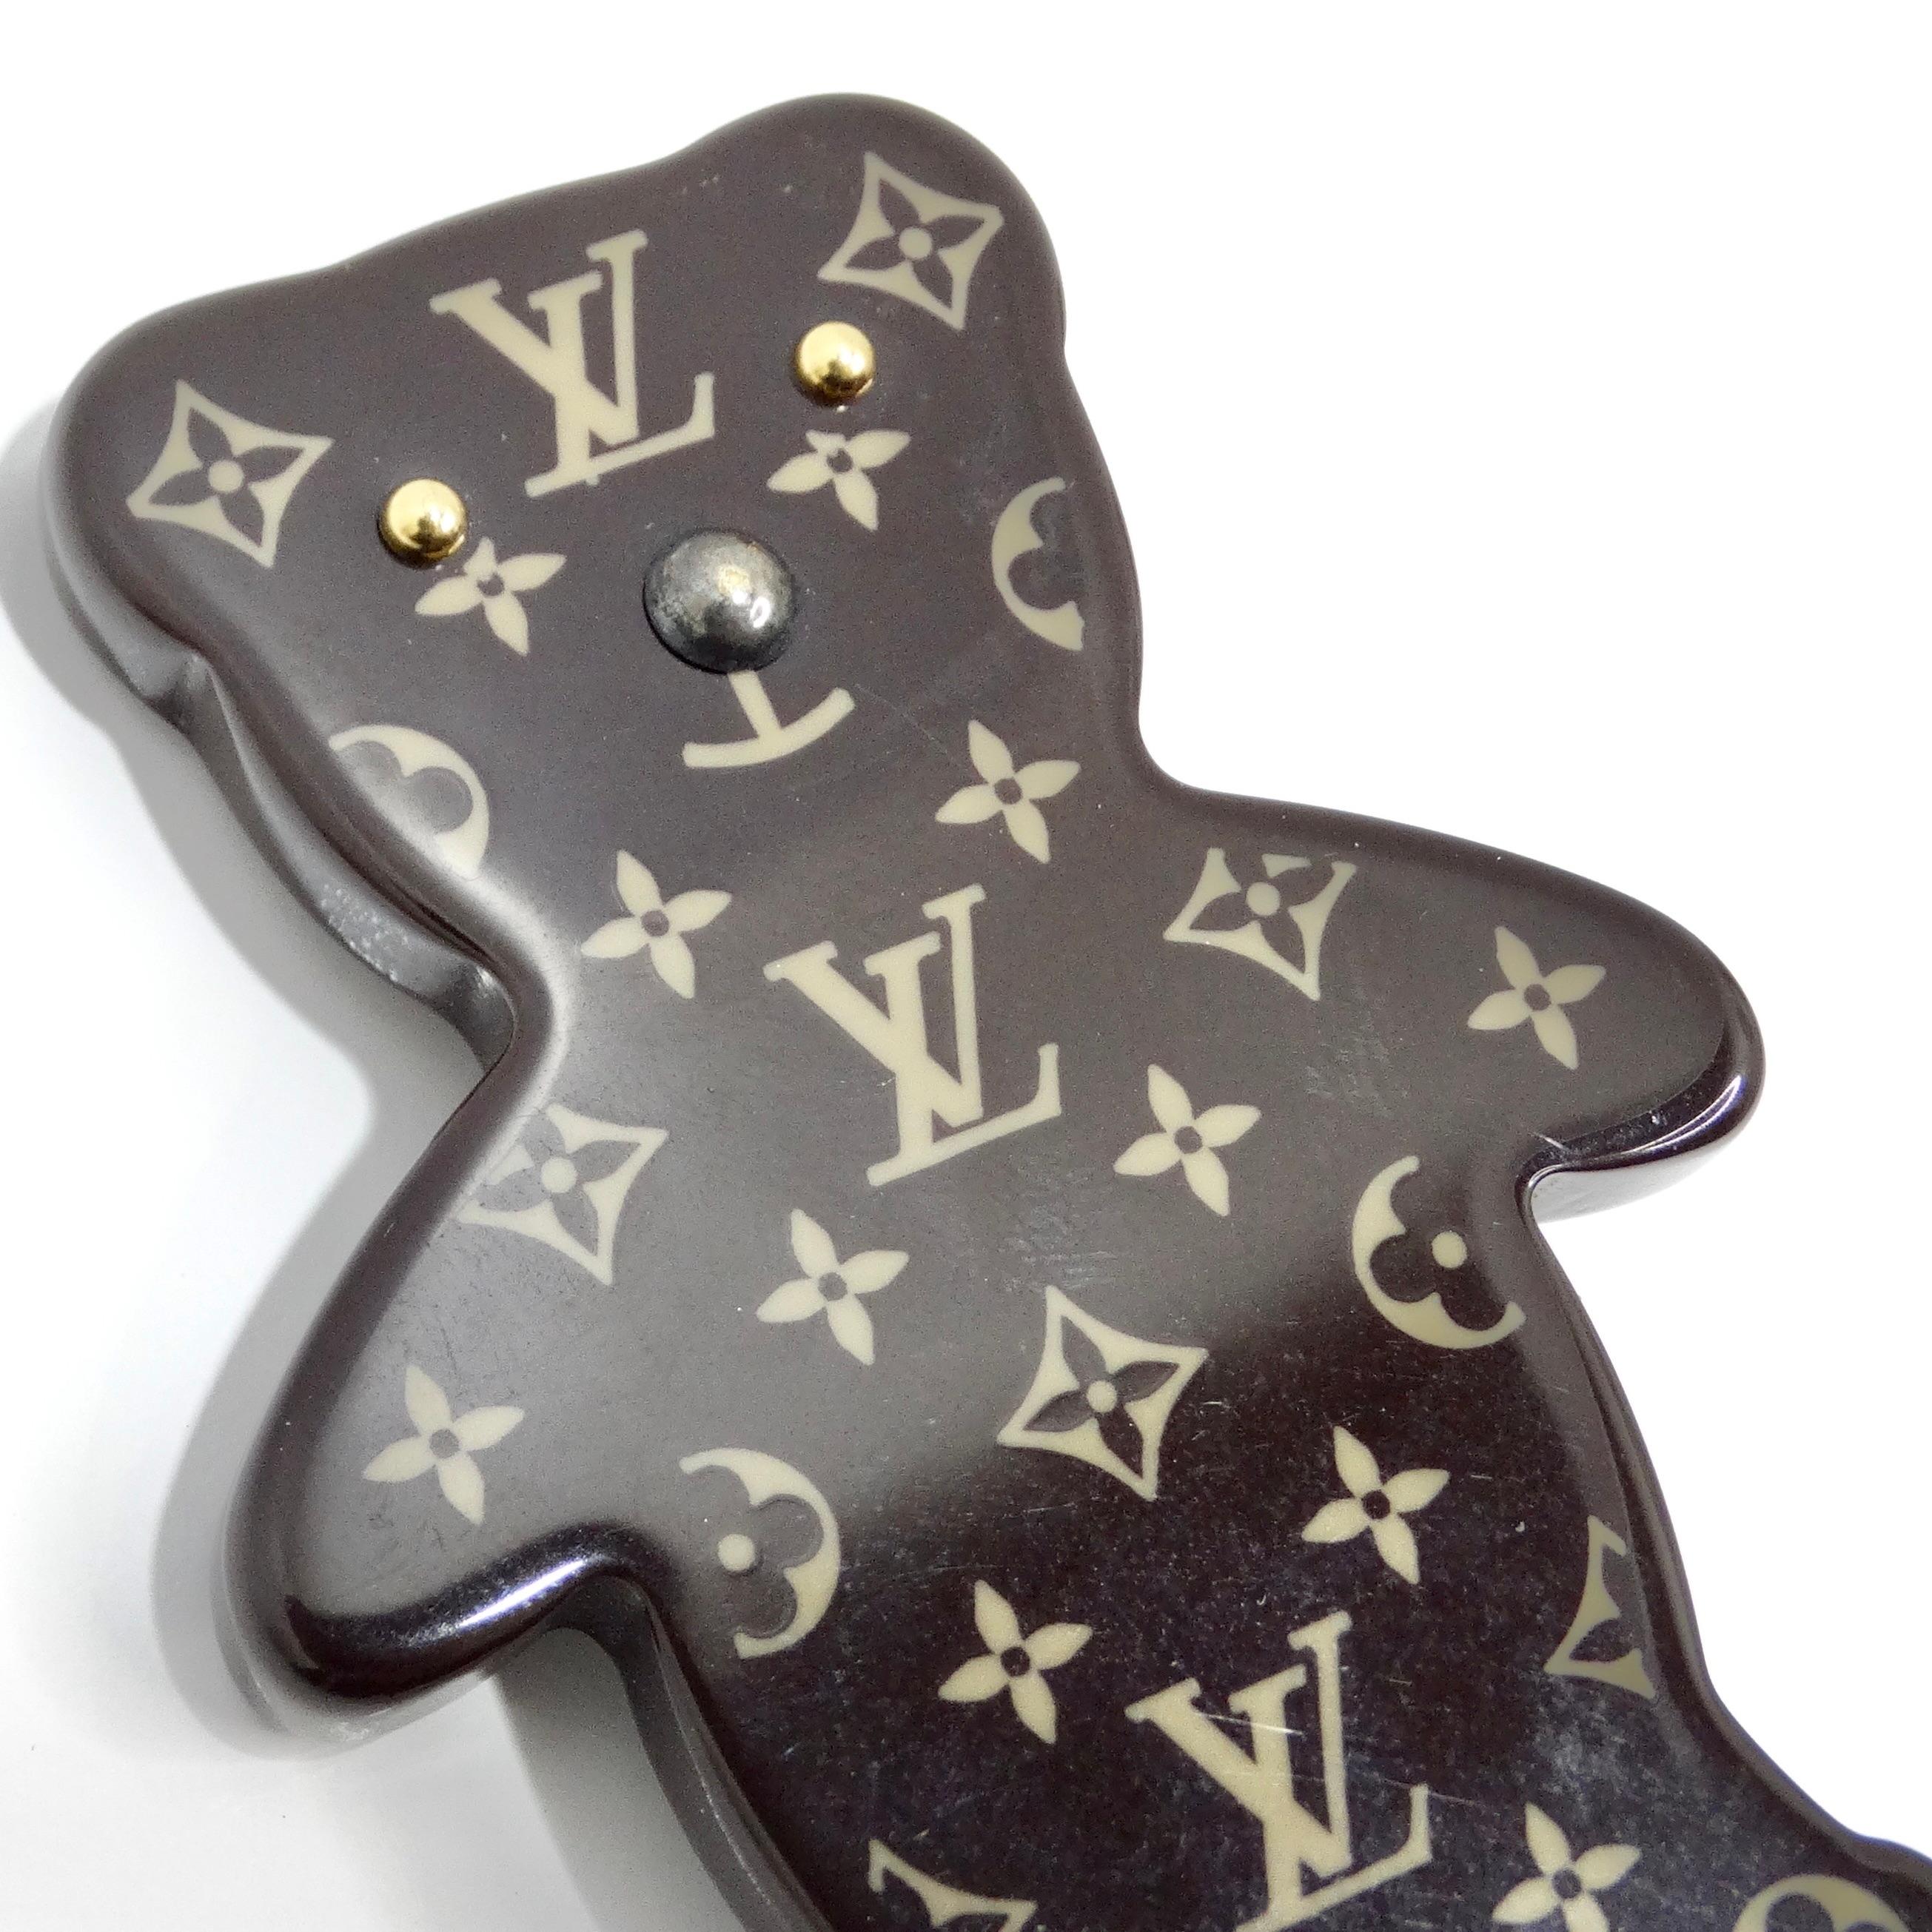 Louis Vuitton Monogram Teddy Bear Brooch In Excellent Condition For Sale In Scottsdale, AZ